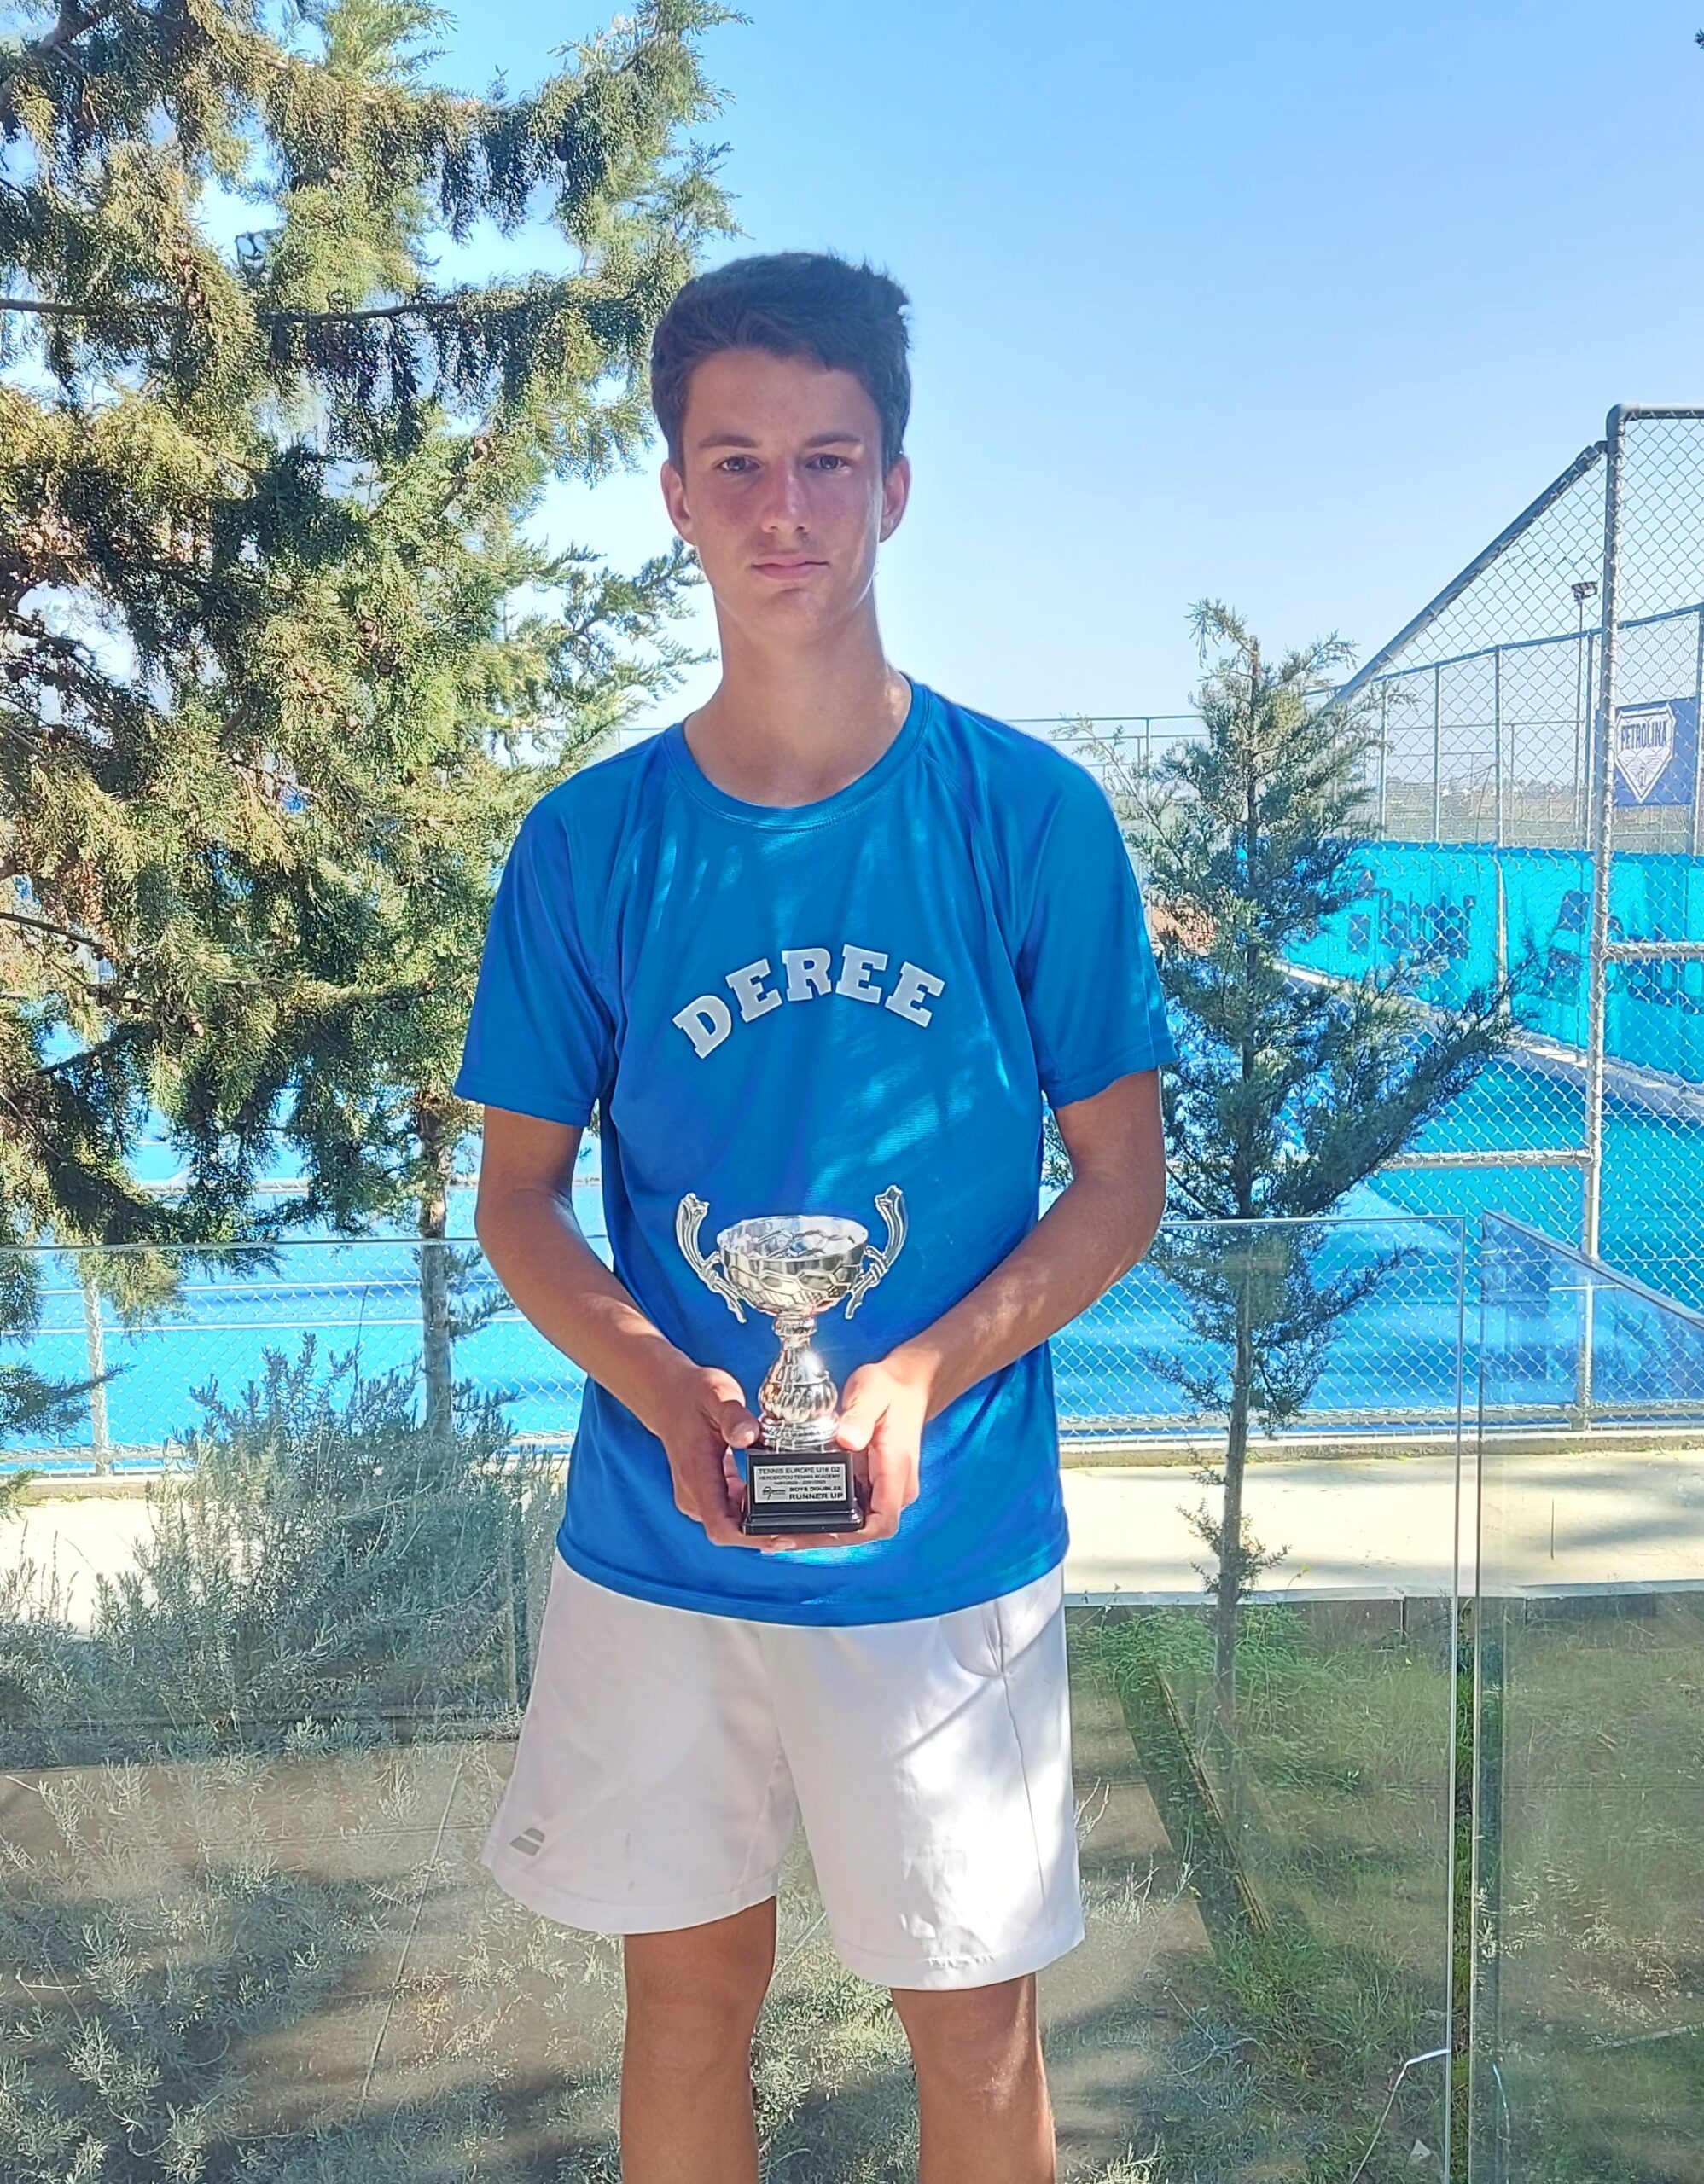 2nd place in doubles for Yiannis Sakkas at the U16 Tennis Europe International Tournament in Cyprus!